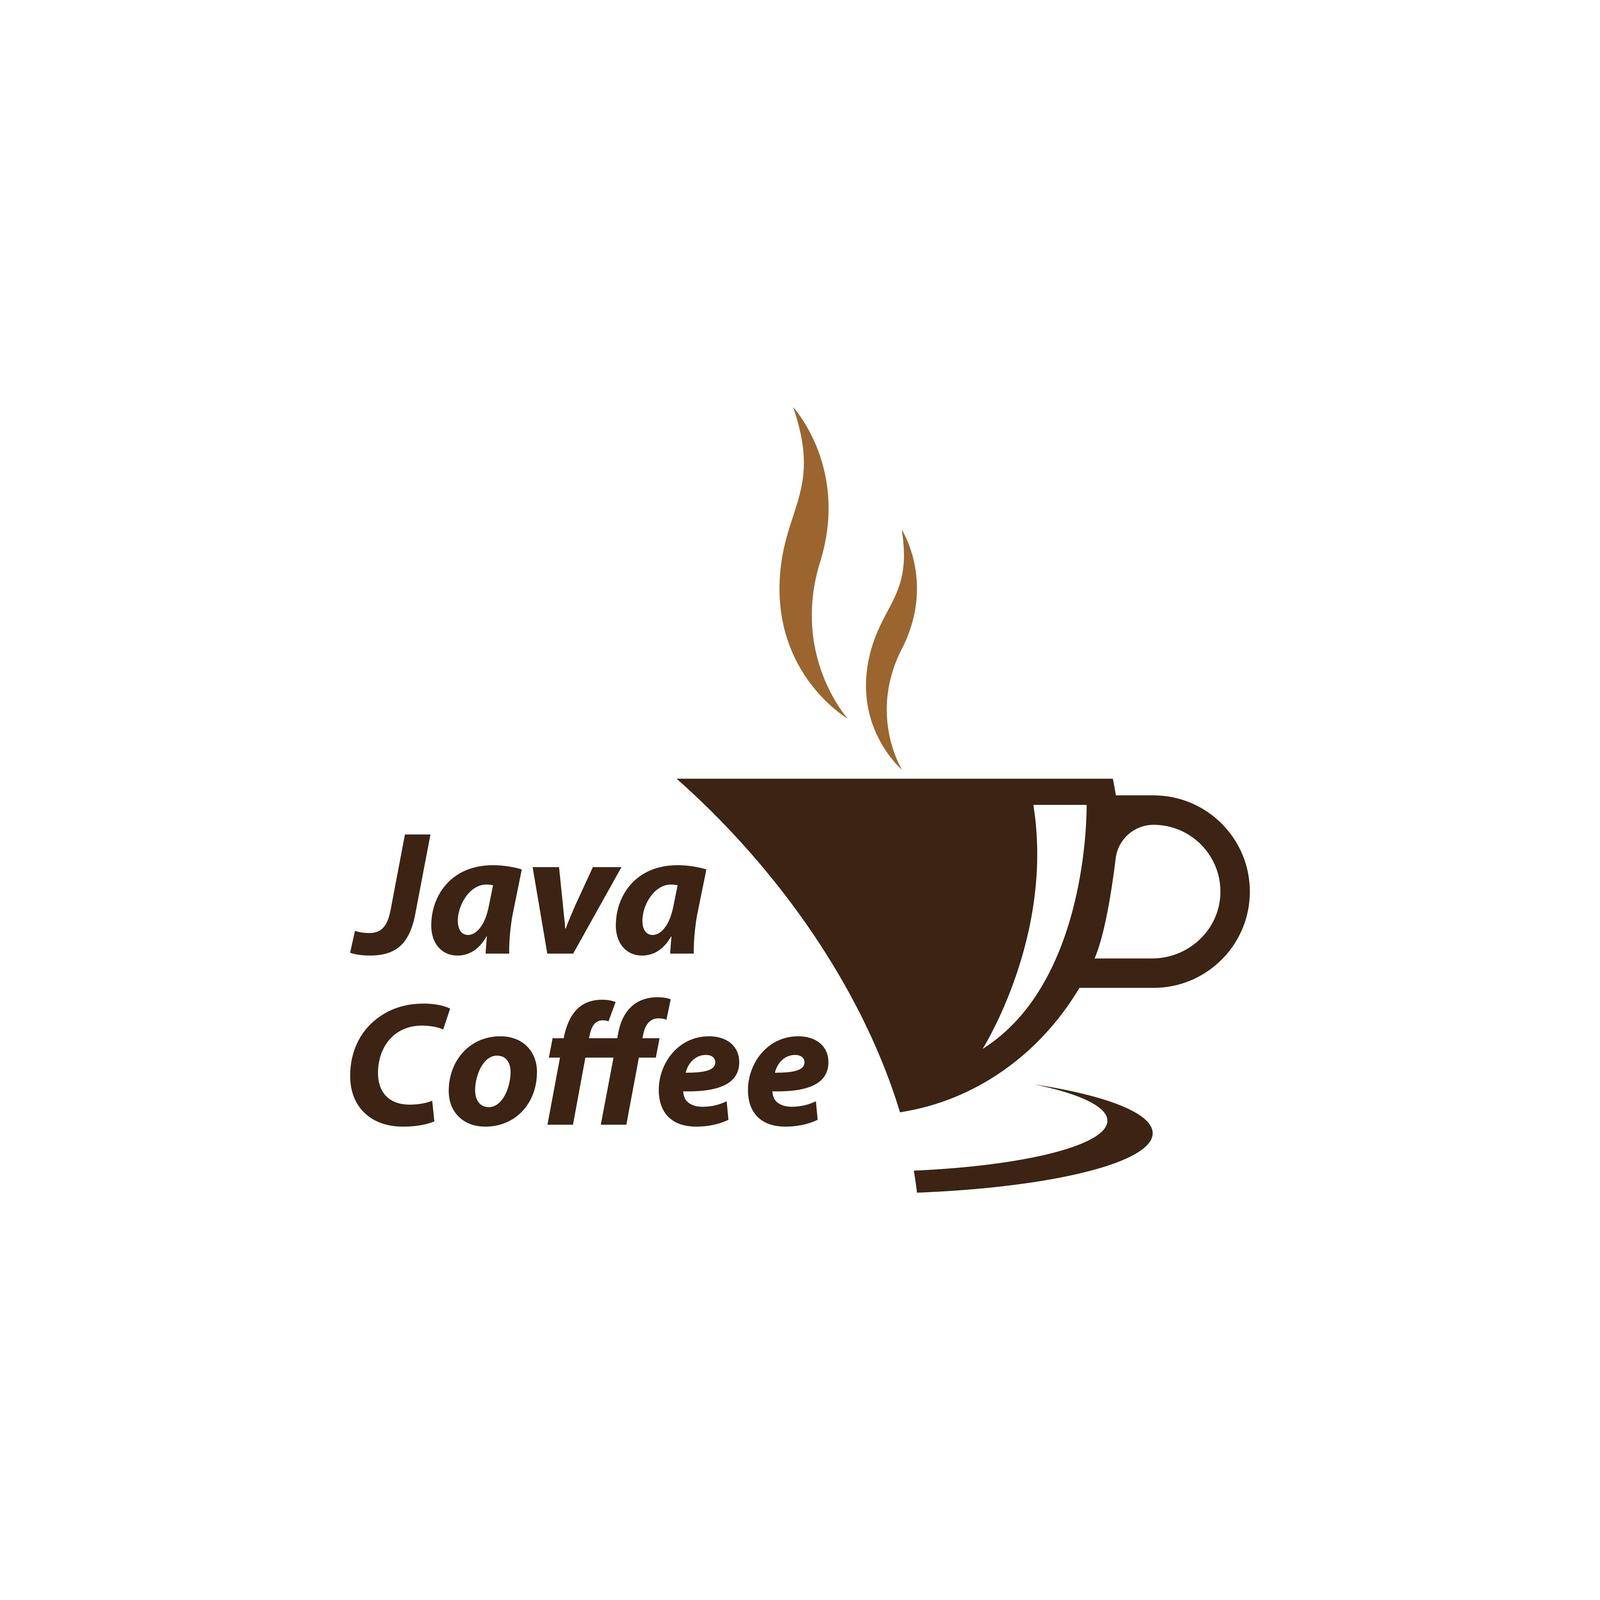 Java coffee logo vector icon by Fat17